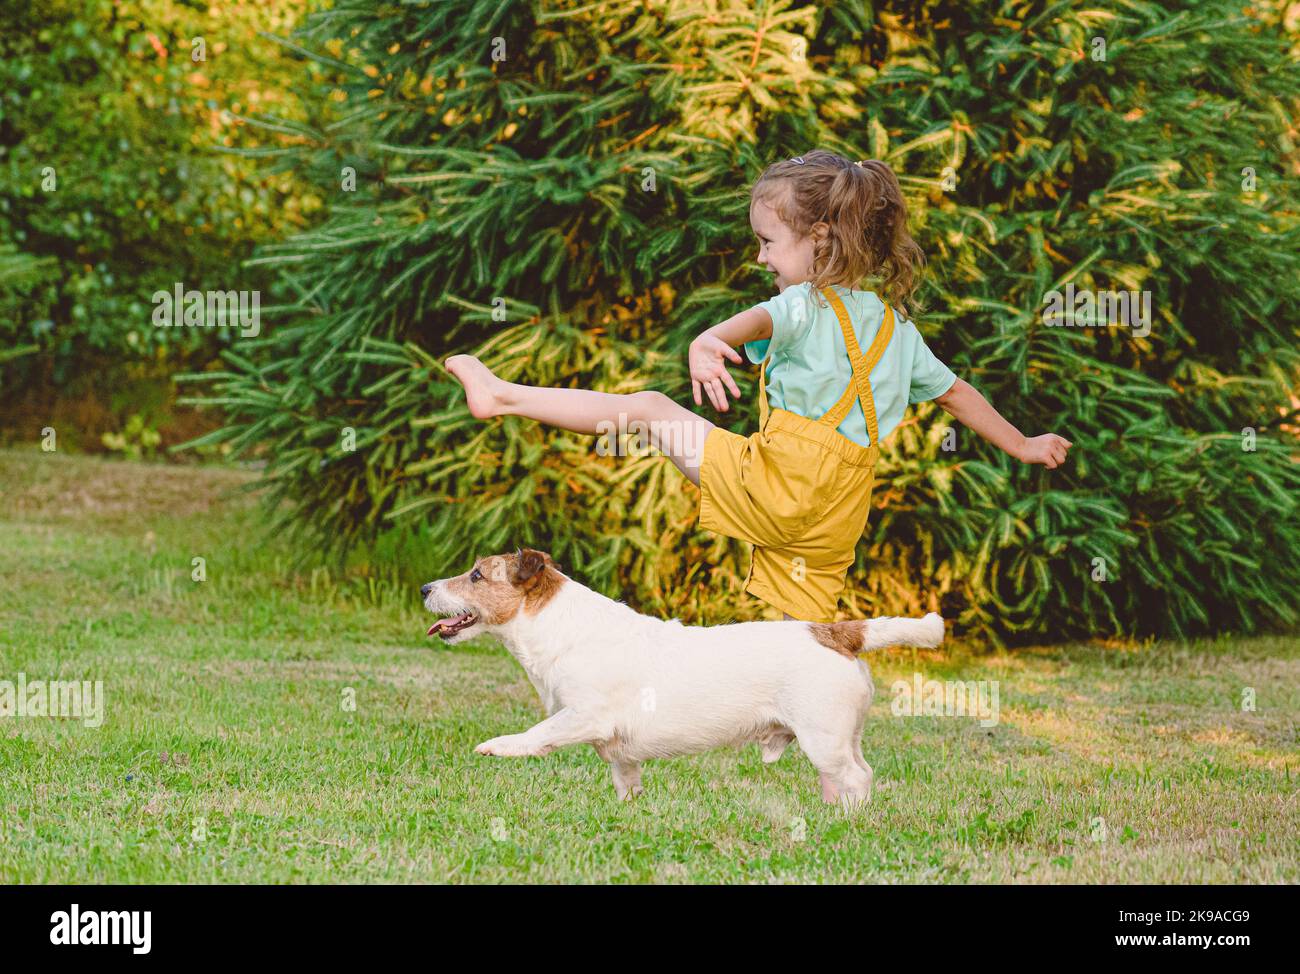 Little girl workouts together with her pet dog at backyard lawn Stock Photo